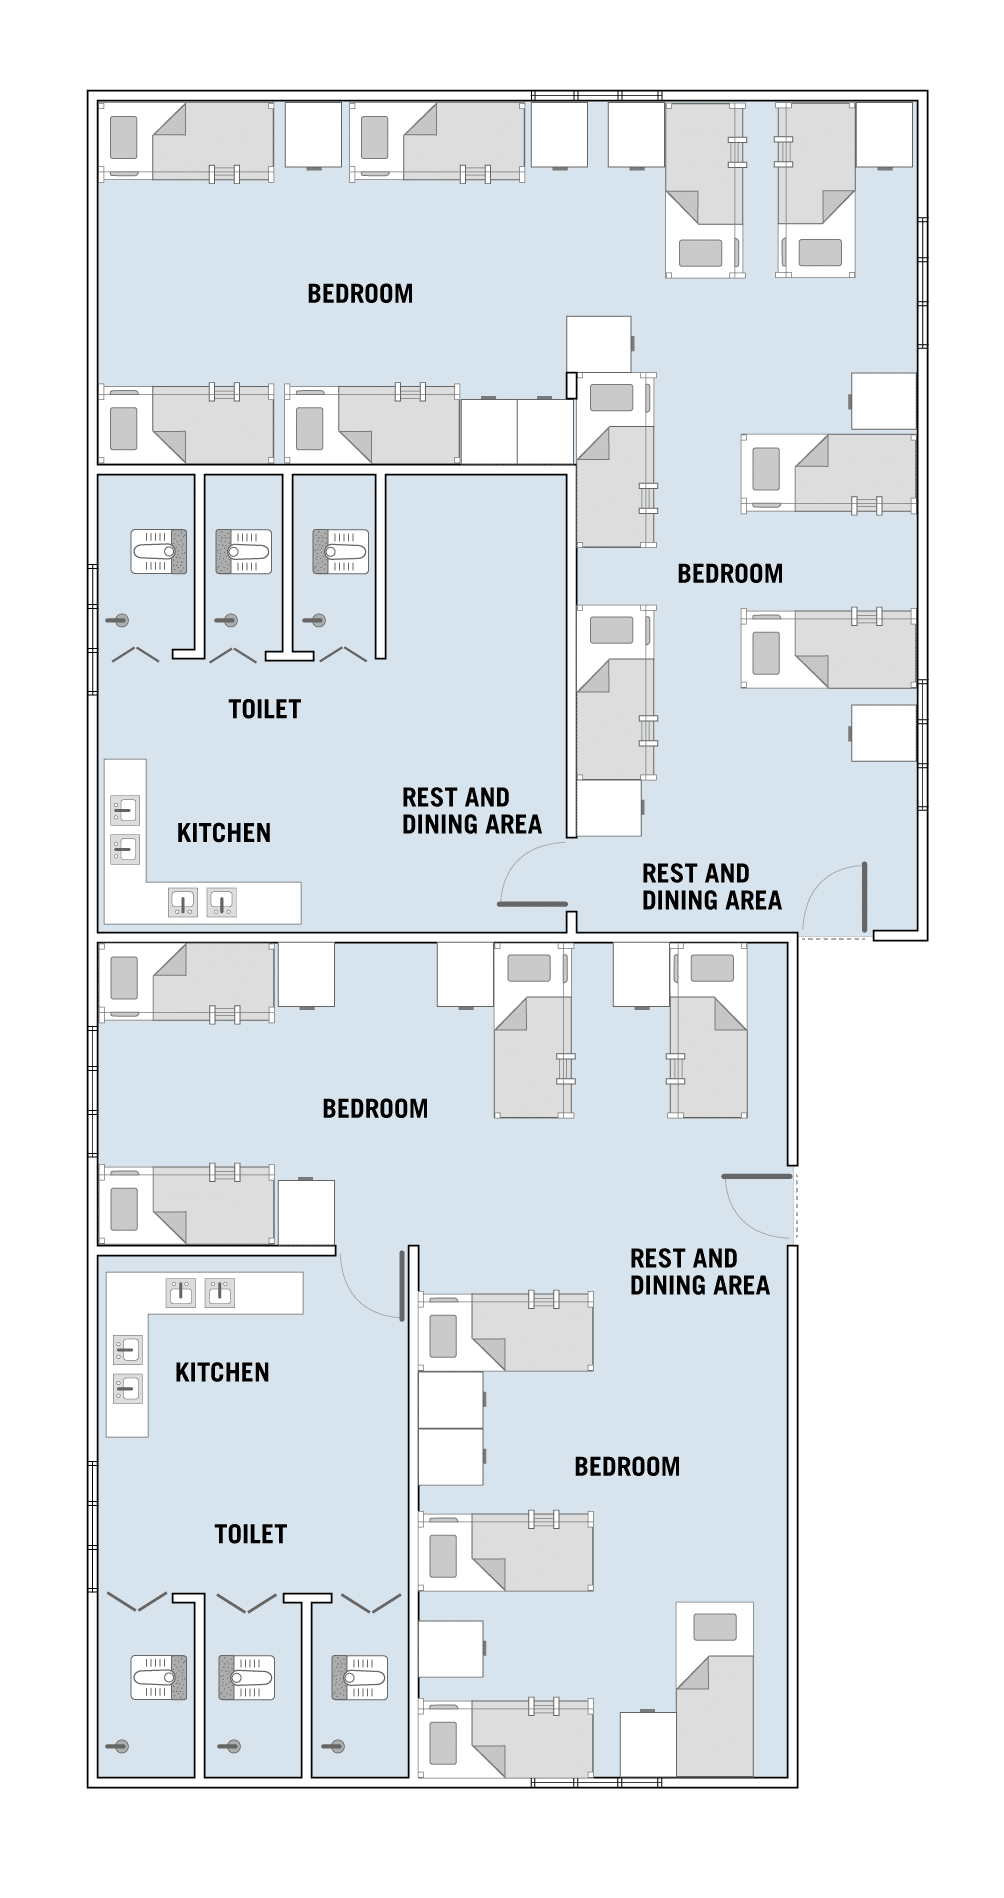 Floorplan of a typical apartment at Westlite Tampoi